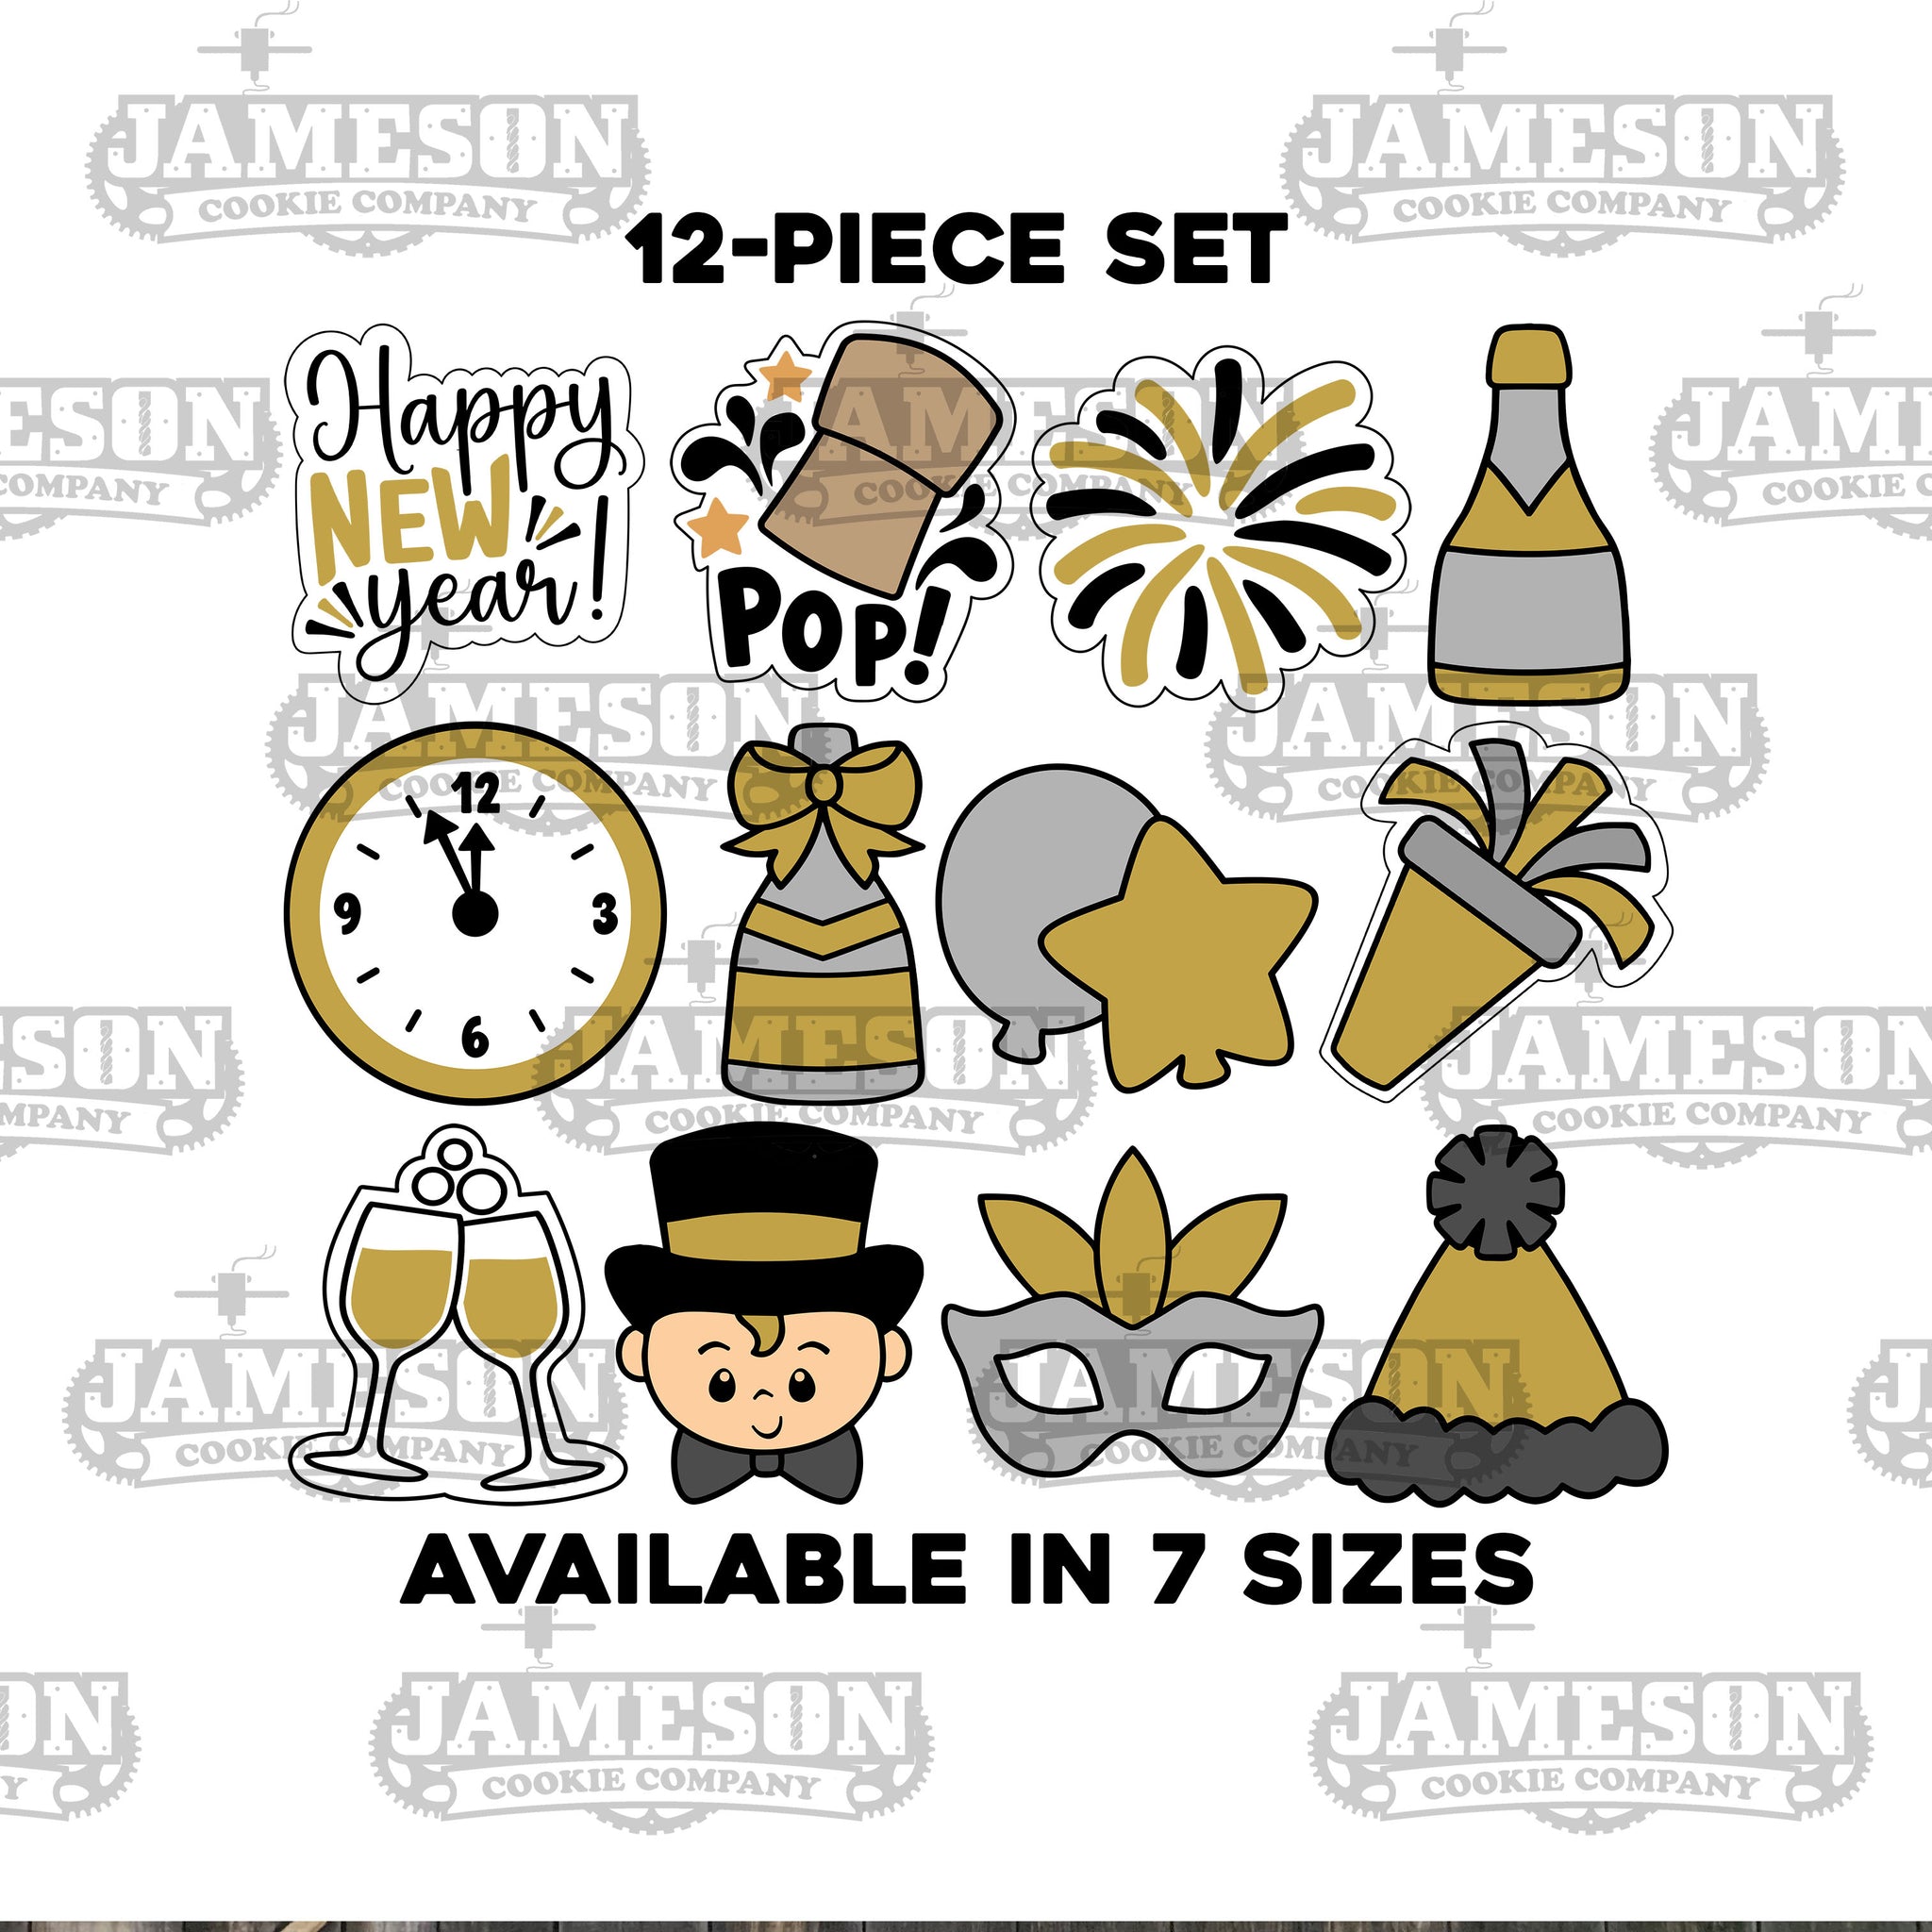 Mini Happy New Years Cookie Cutter Set - 12 Piece New Years Eve Set - Party Hat, Cork Pop, Champagne, Noisemaker, Baby, and more!